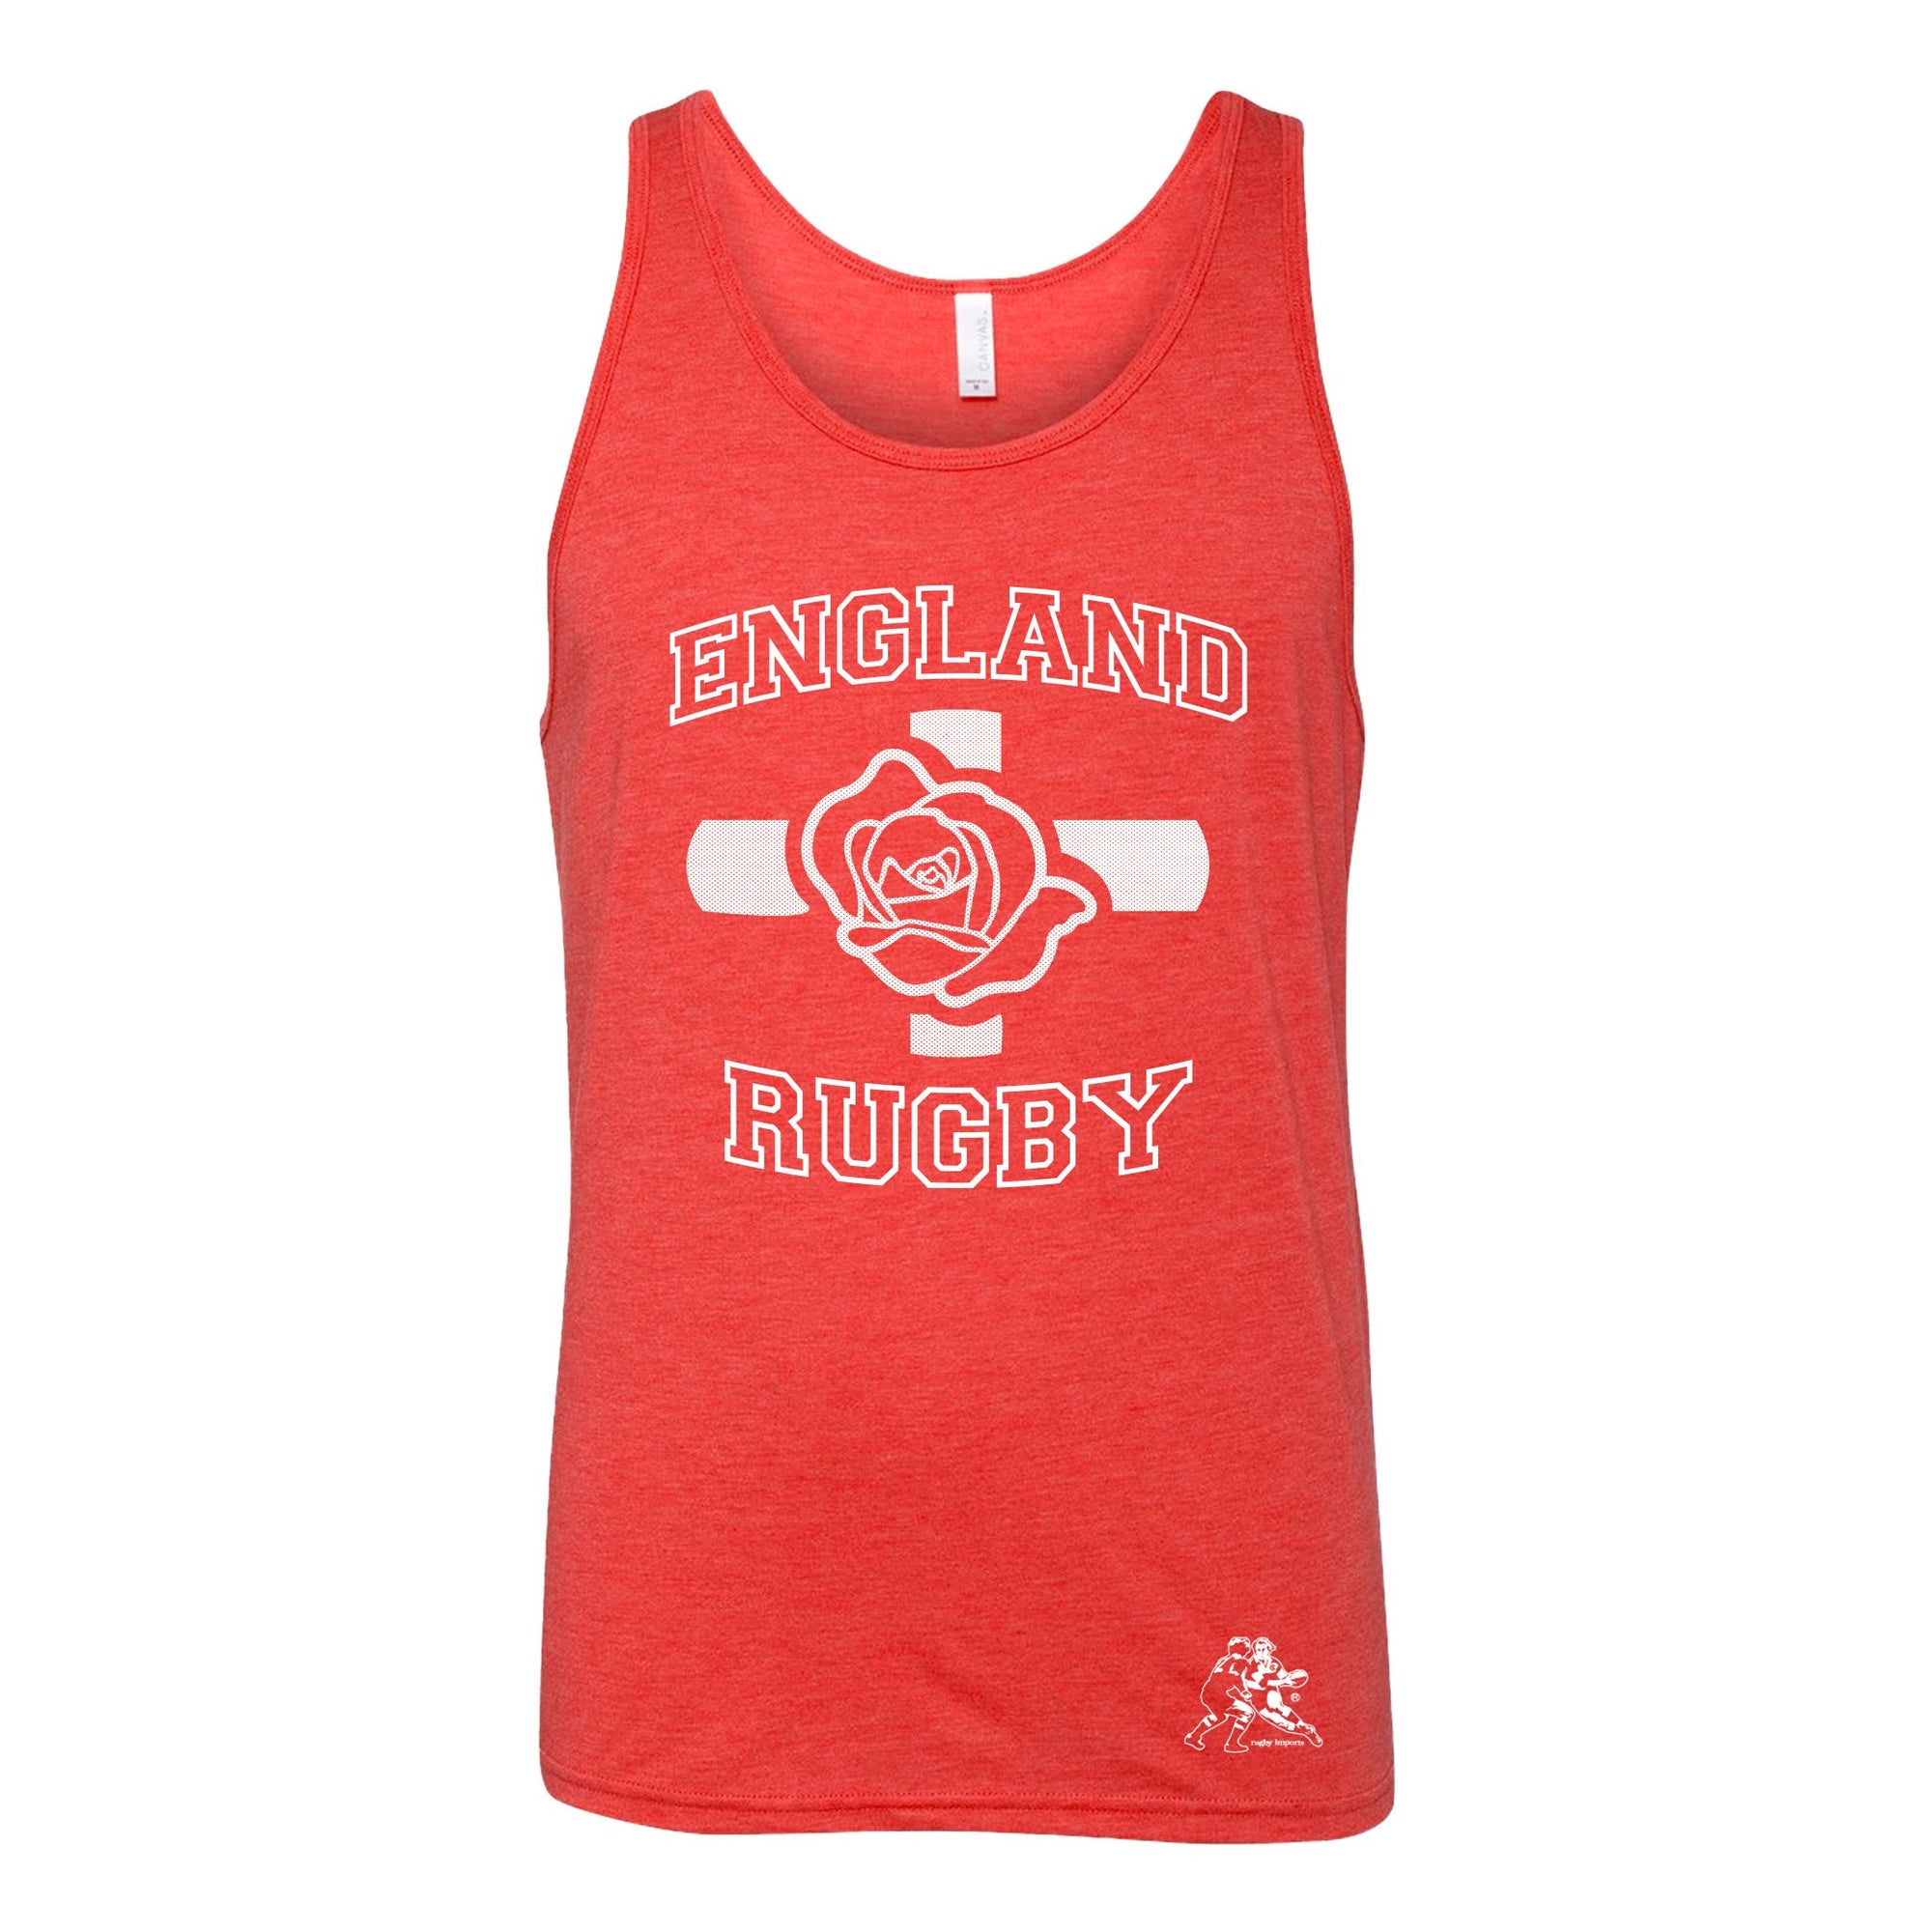 Rugby Imports England Rugby Tank Top